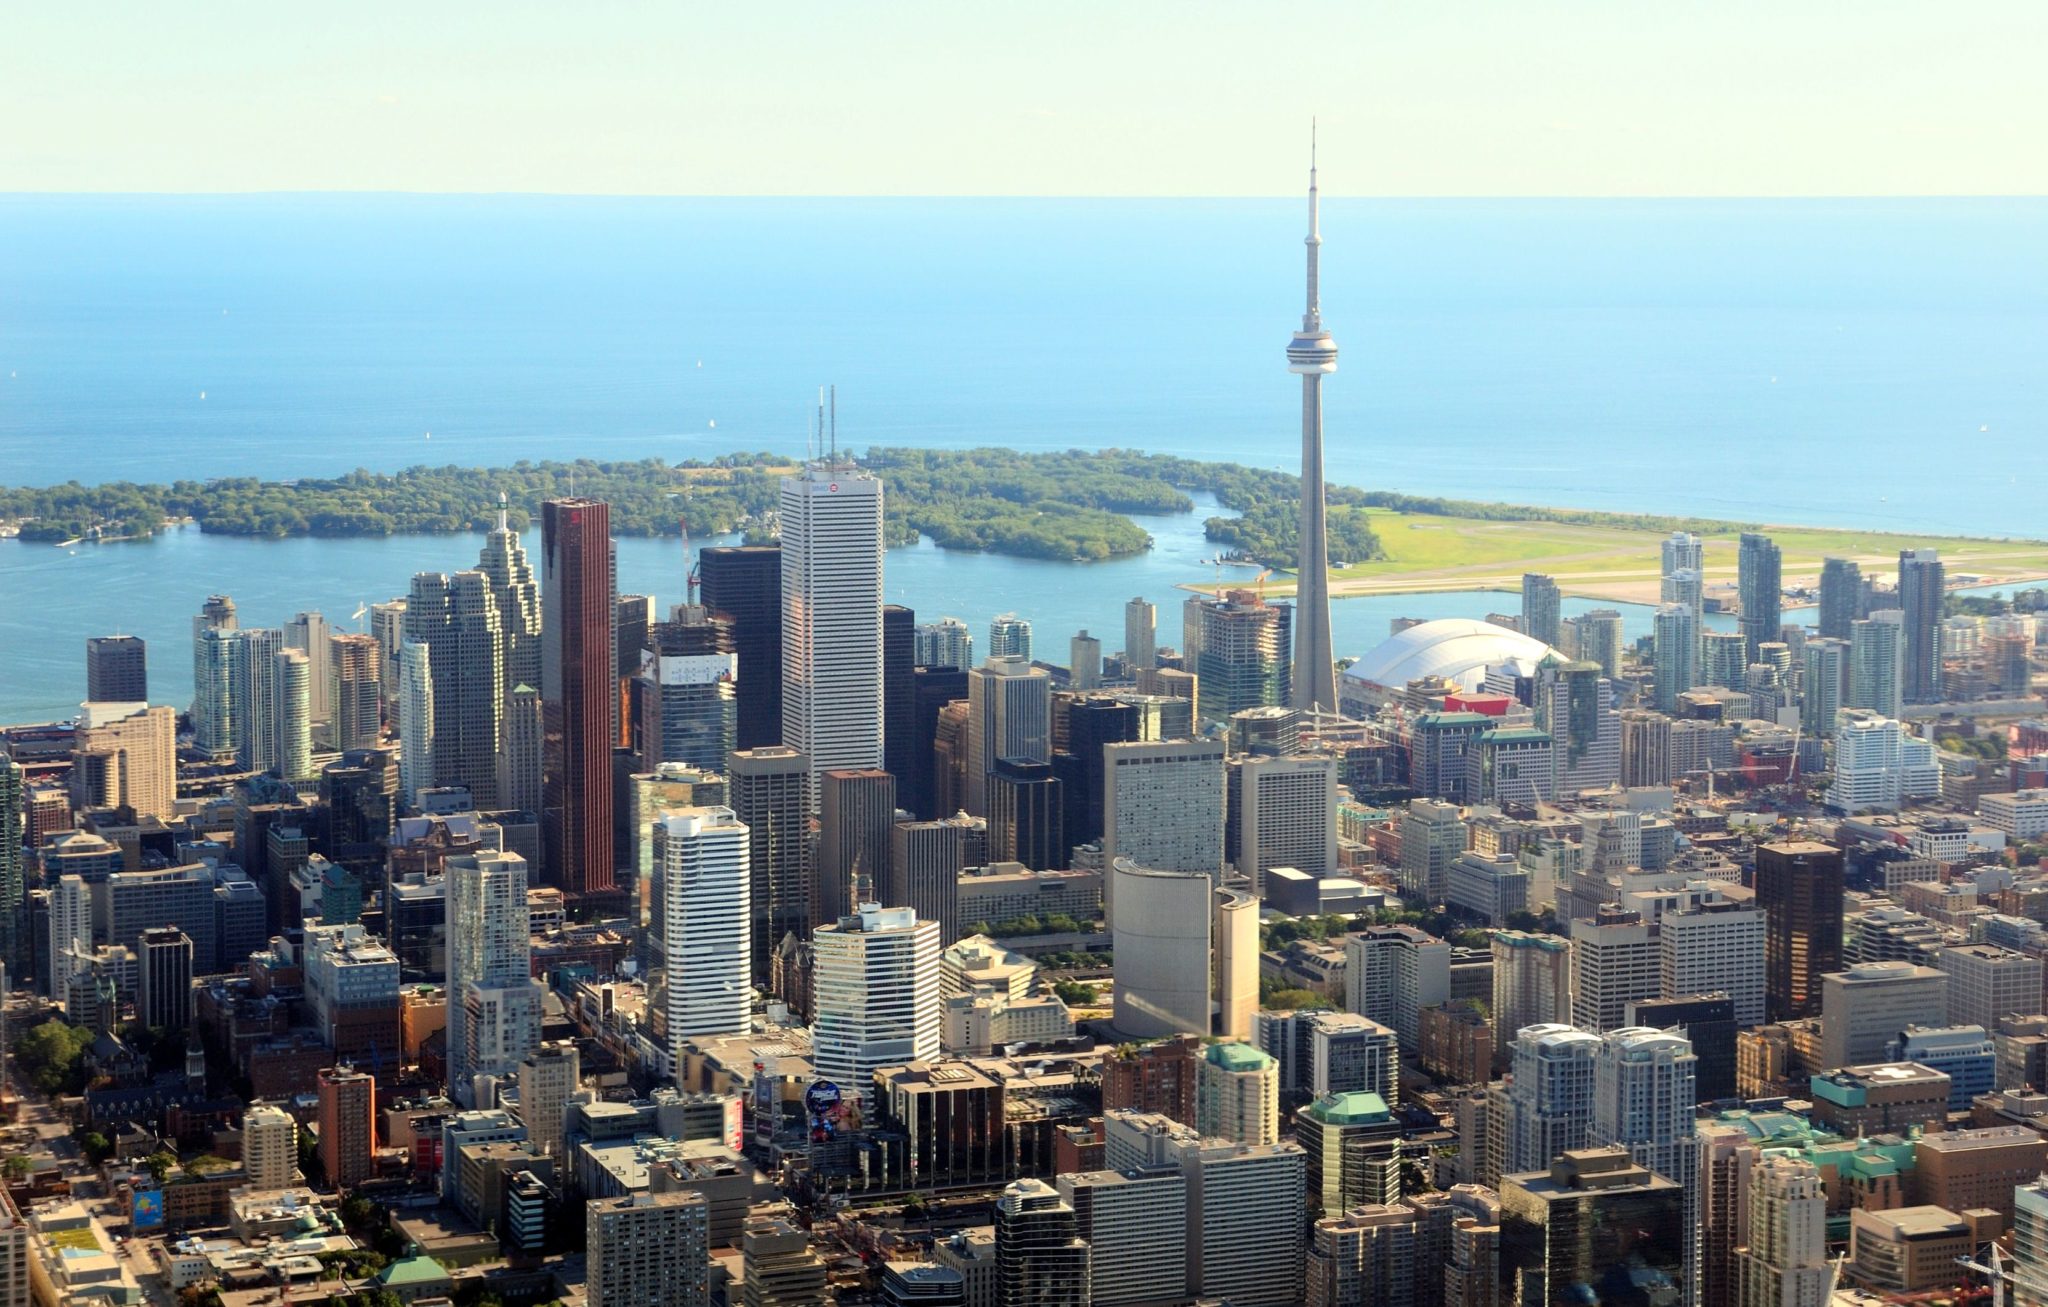 Image of Downtown Toronto, Canada with view of CN Tower and water